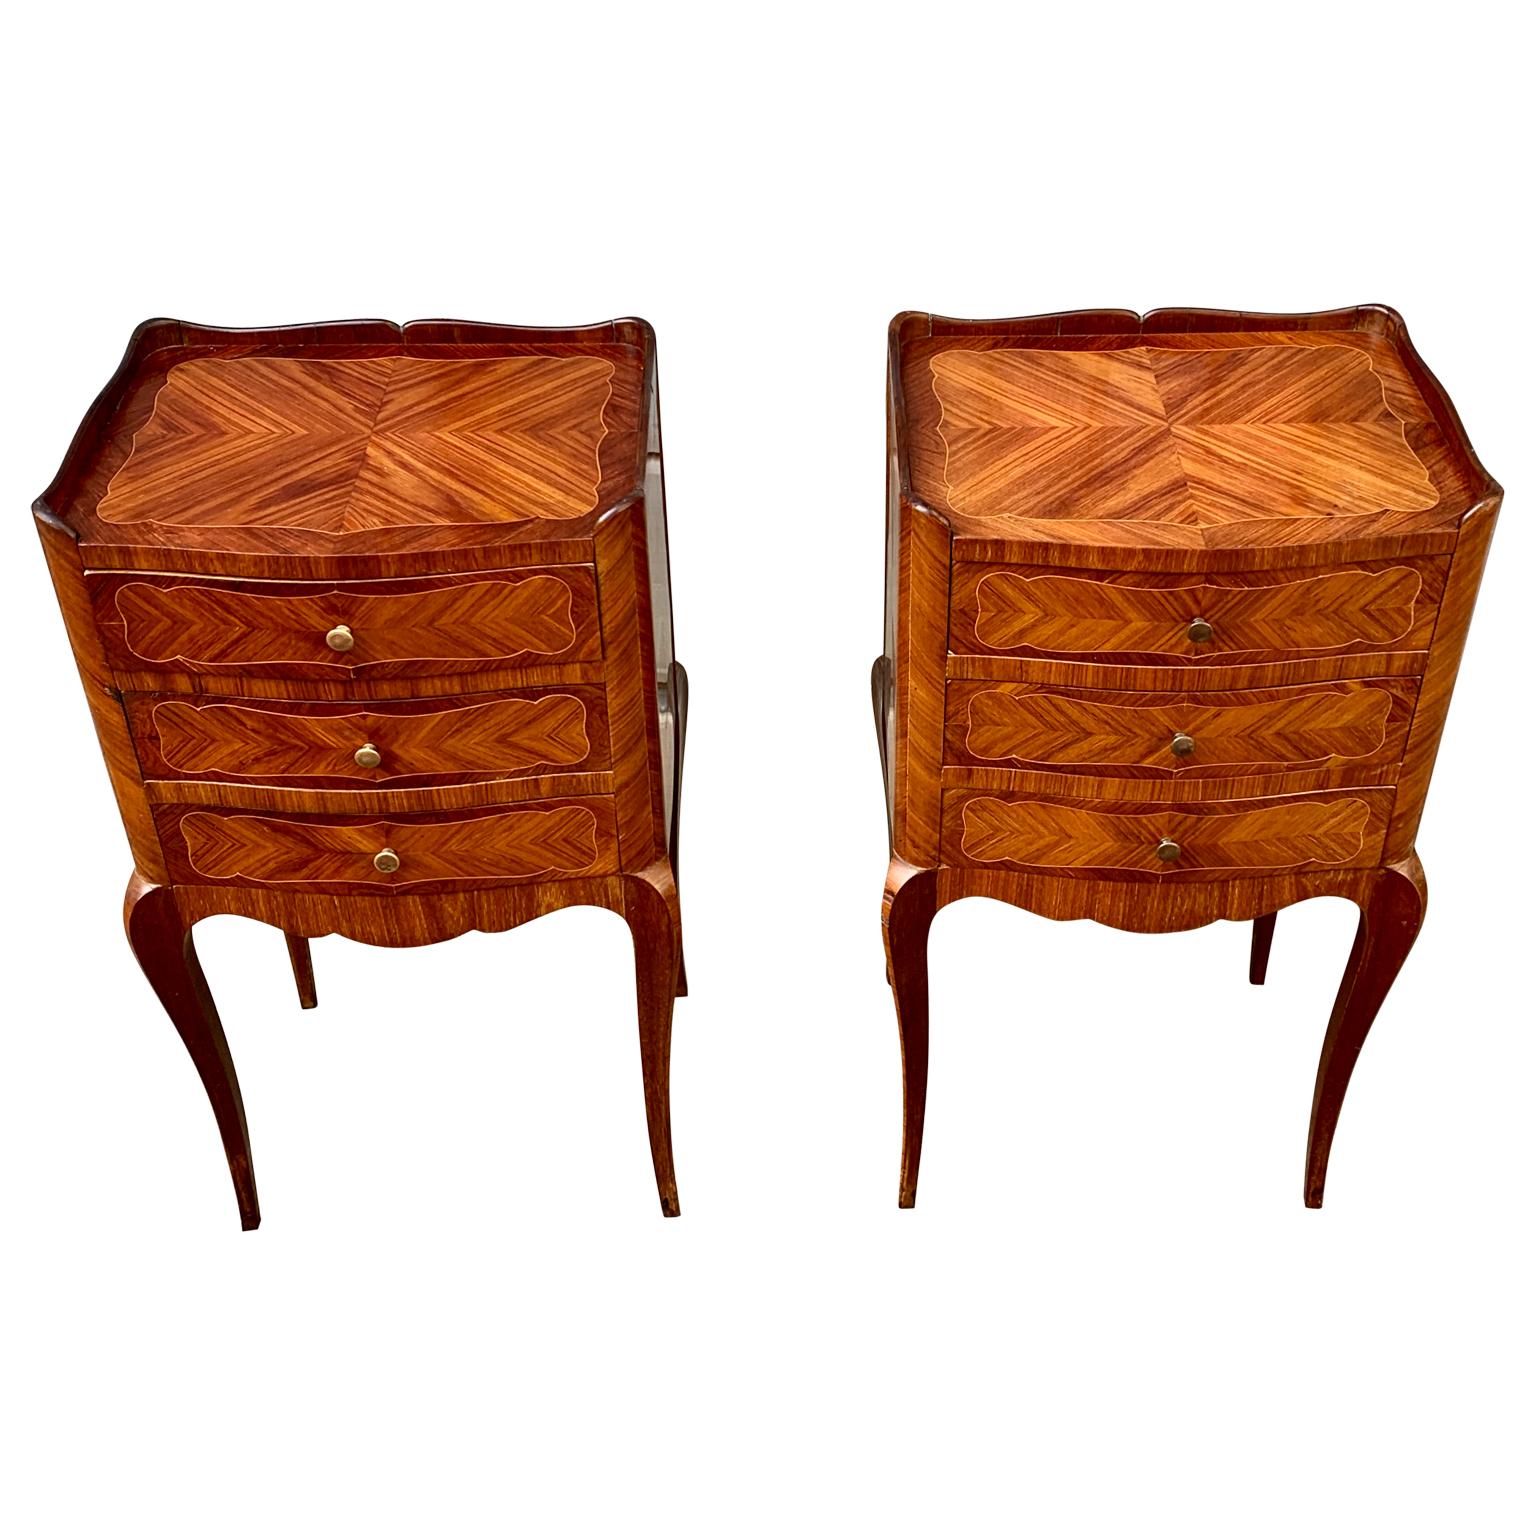 A pair of French Mid-Century nightstands or small chest of drawers in mahogany veneer with 3 drawers that can be used as bedside commodes- The pair is 